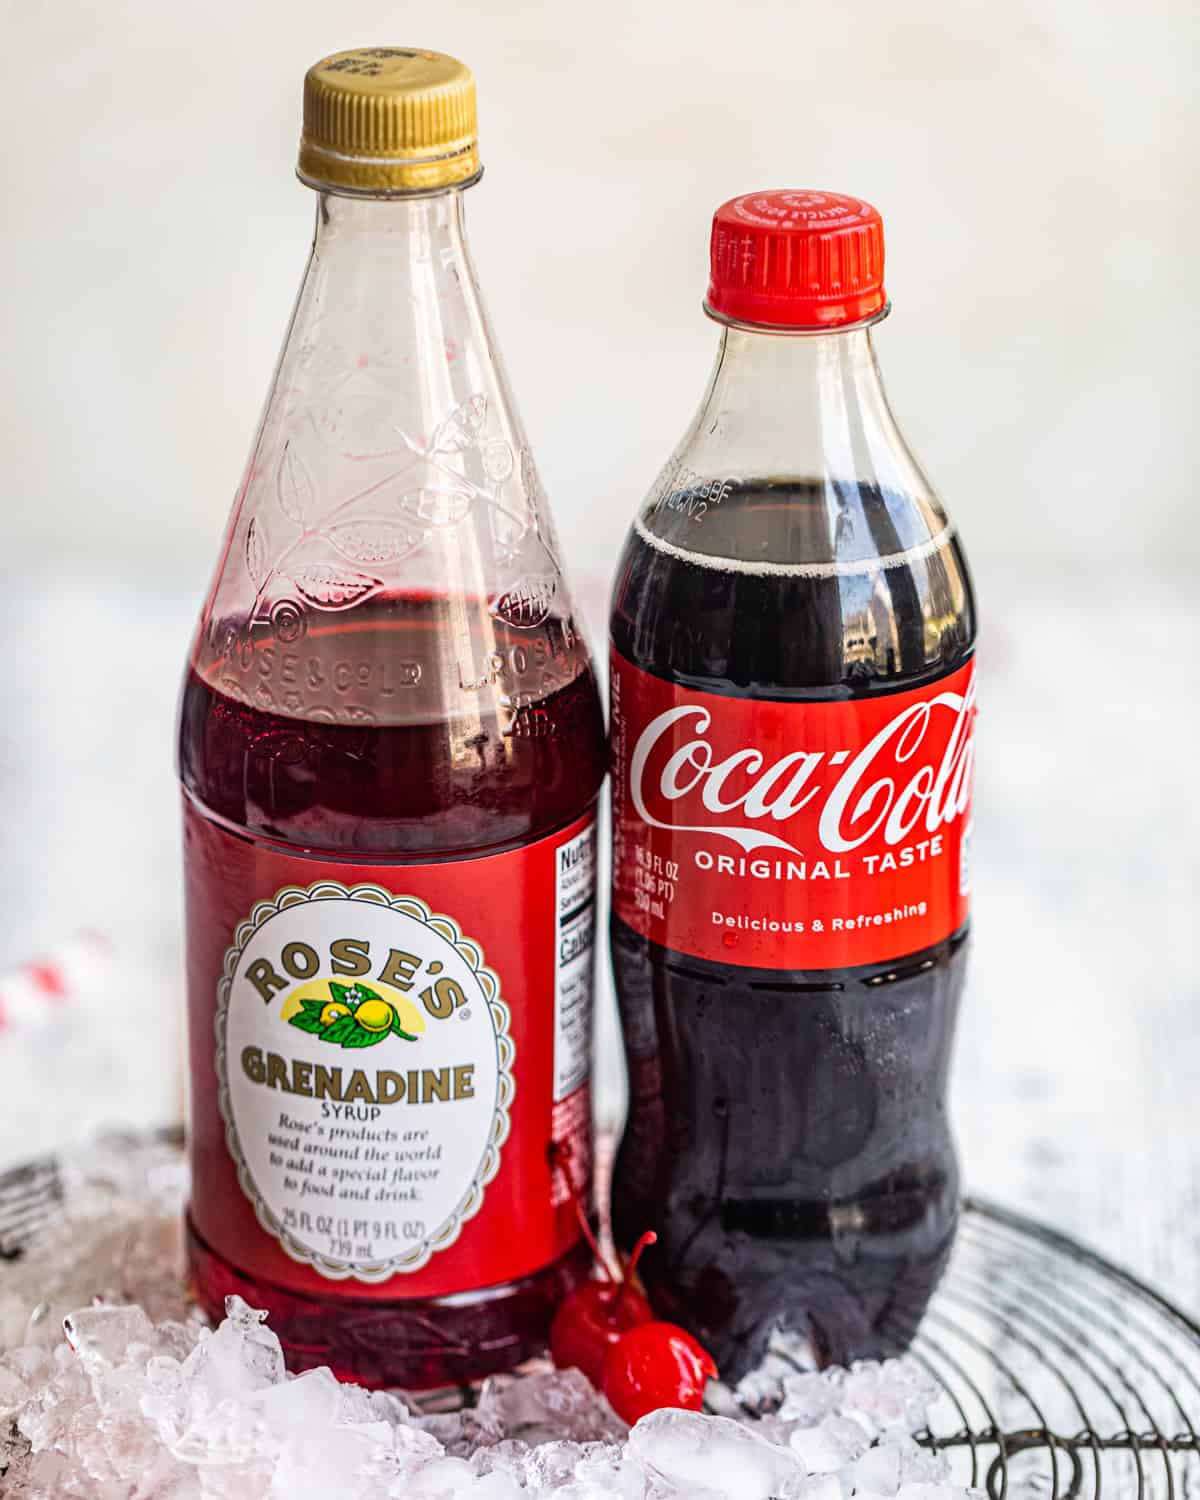 ingredients to make a Roy Rogers drink - coca-cola, grenadine, and maraschino cherries.